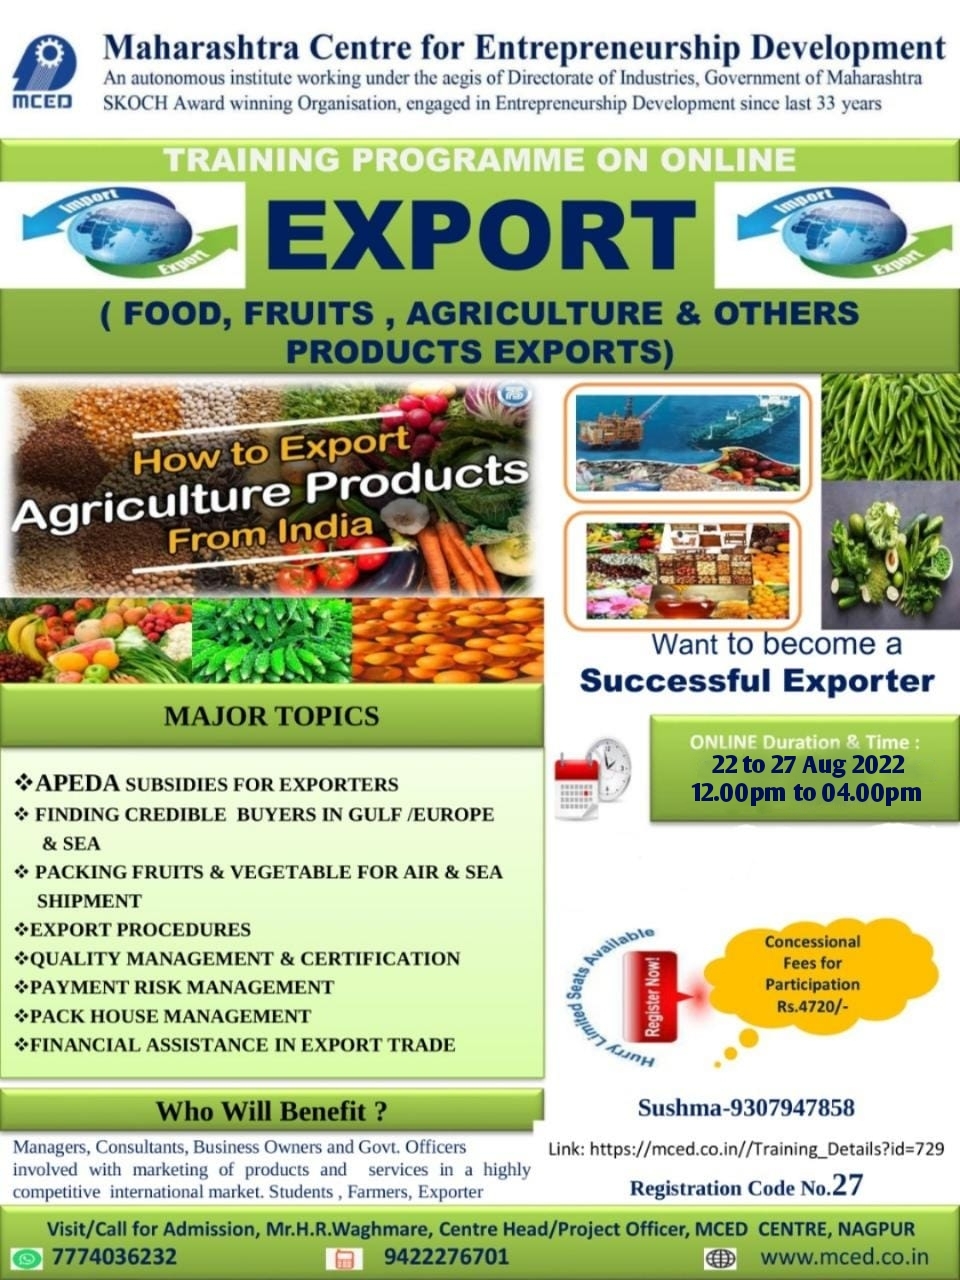 TRAINING PROGRAMME FOR EXPORT (FOOD, FRUITS, AGRICULTURE, & OTHERS PRODUCTS EXPORTS)